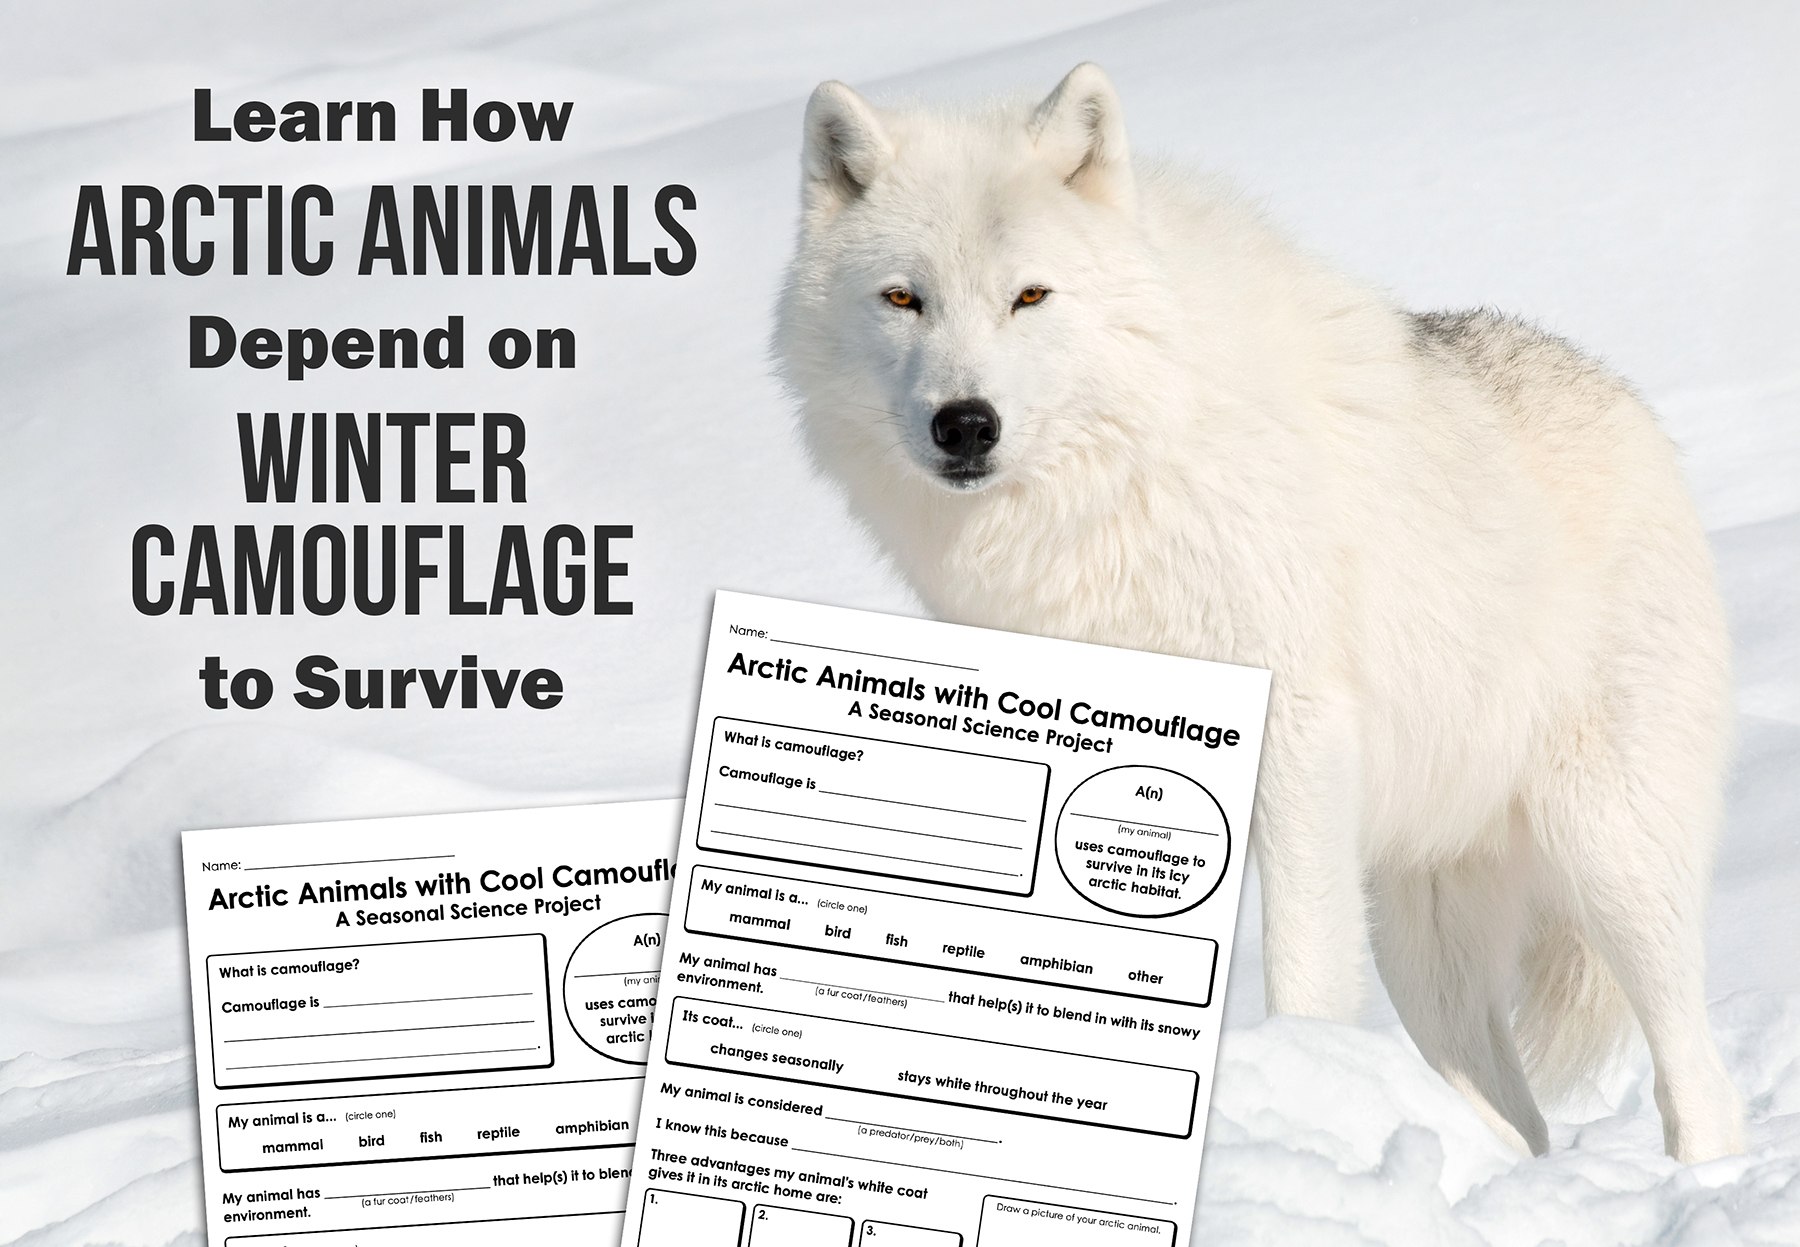 Learn About Arctic Animals with Cool Camouflage!